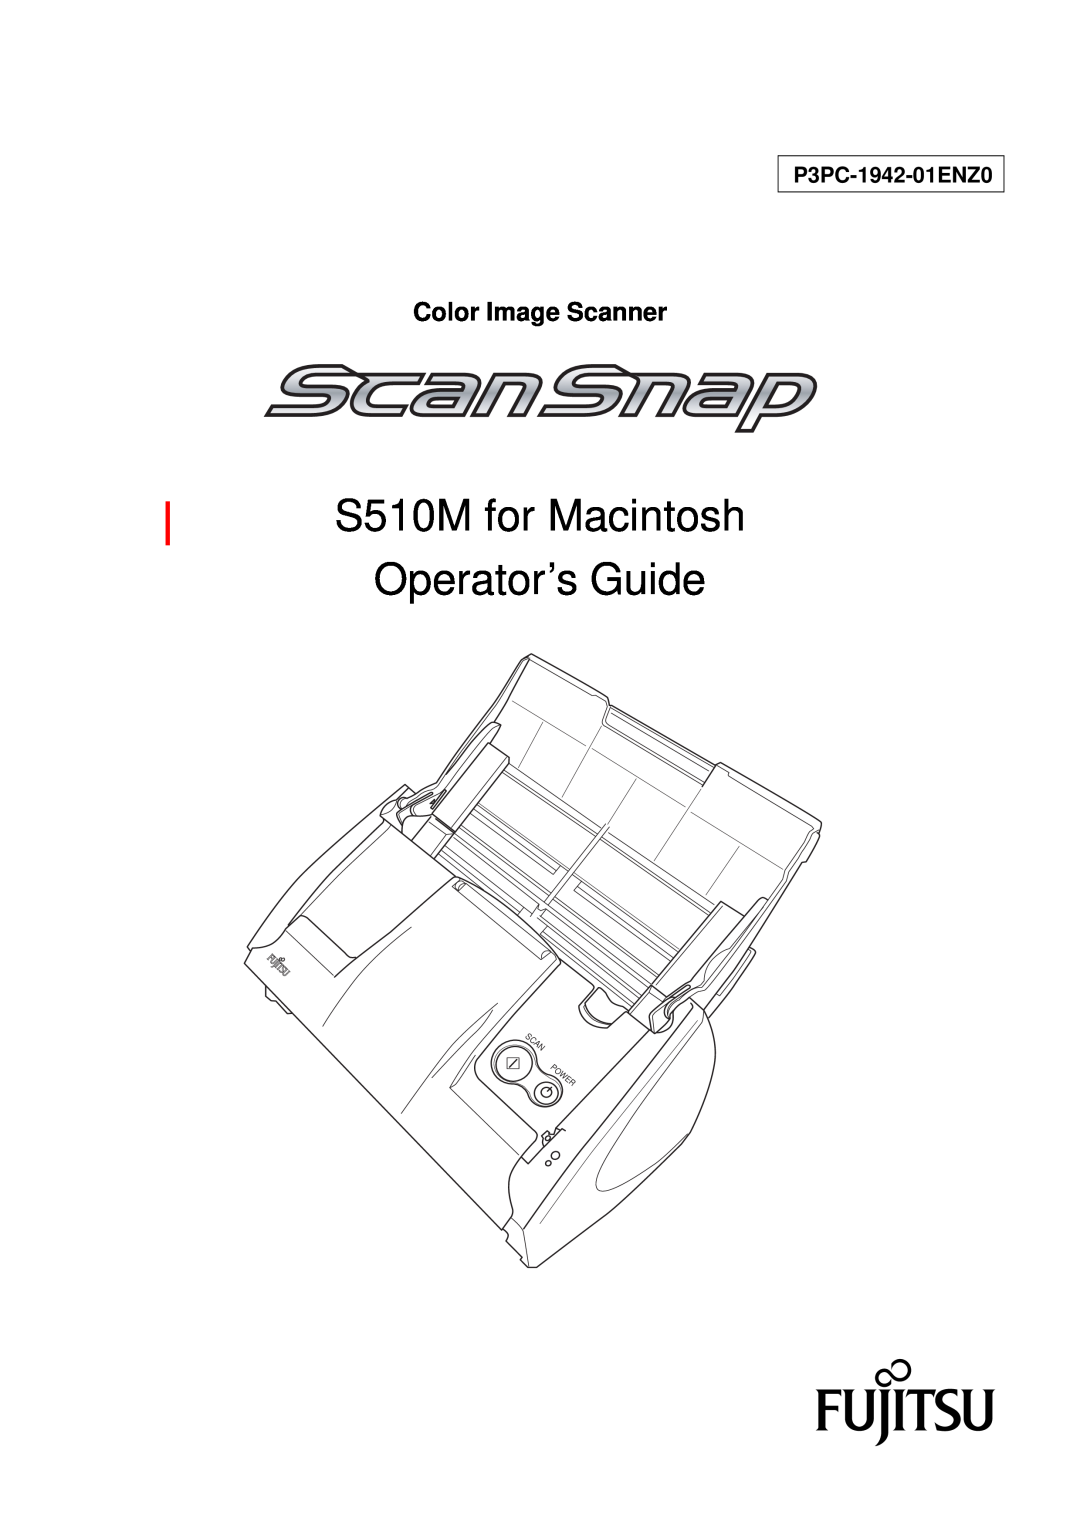 Fujitsu manual S510M for Macintosh Operator’s Guide, Color Image Scanner, P3PC-1942-01ENZ0, Power 